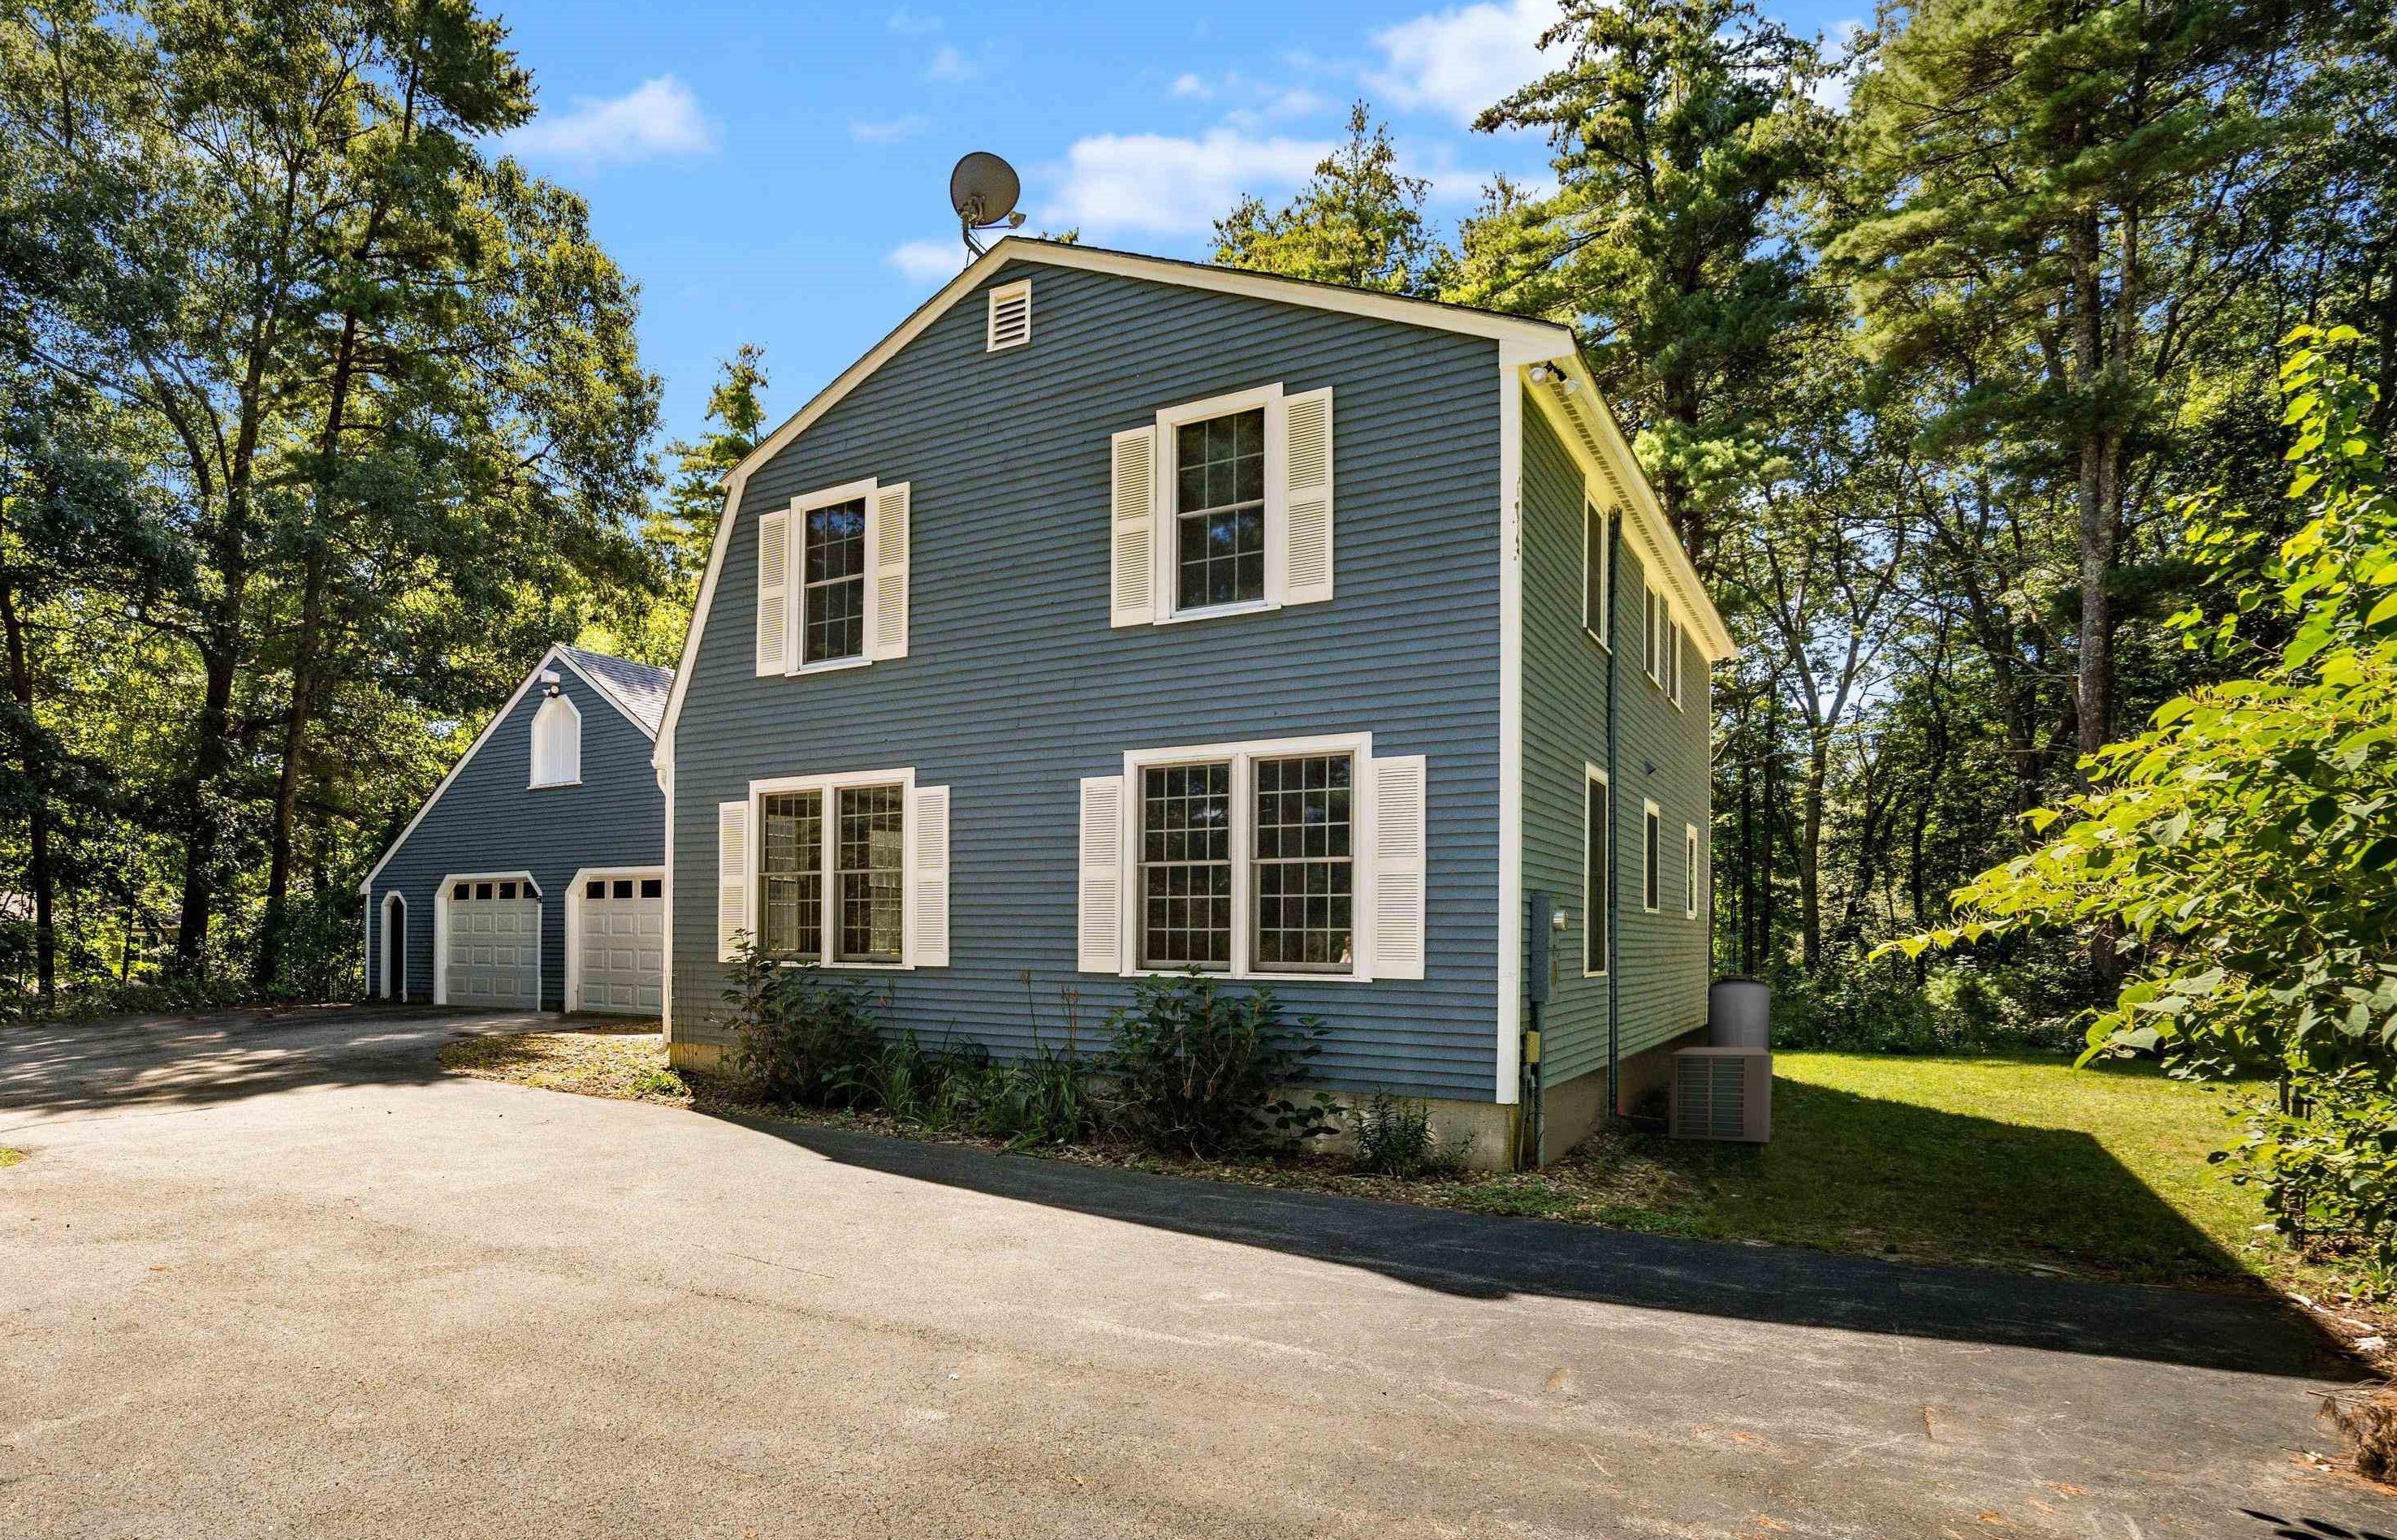 15 Heritage Hill Rd, Windham, NH 03087